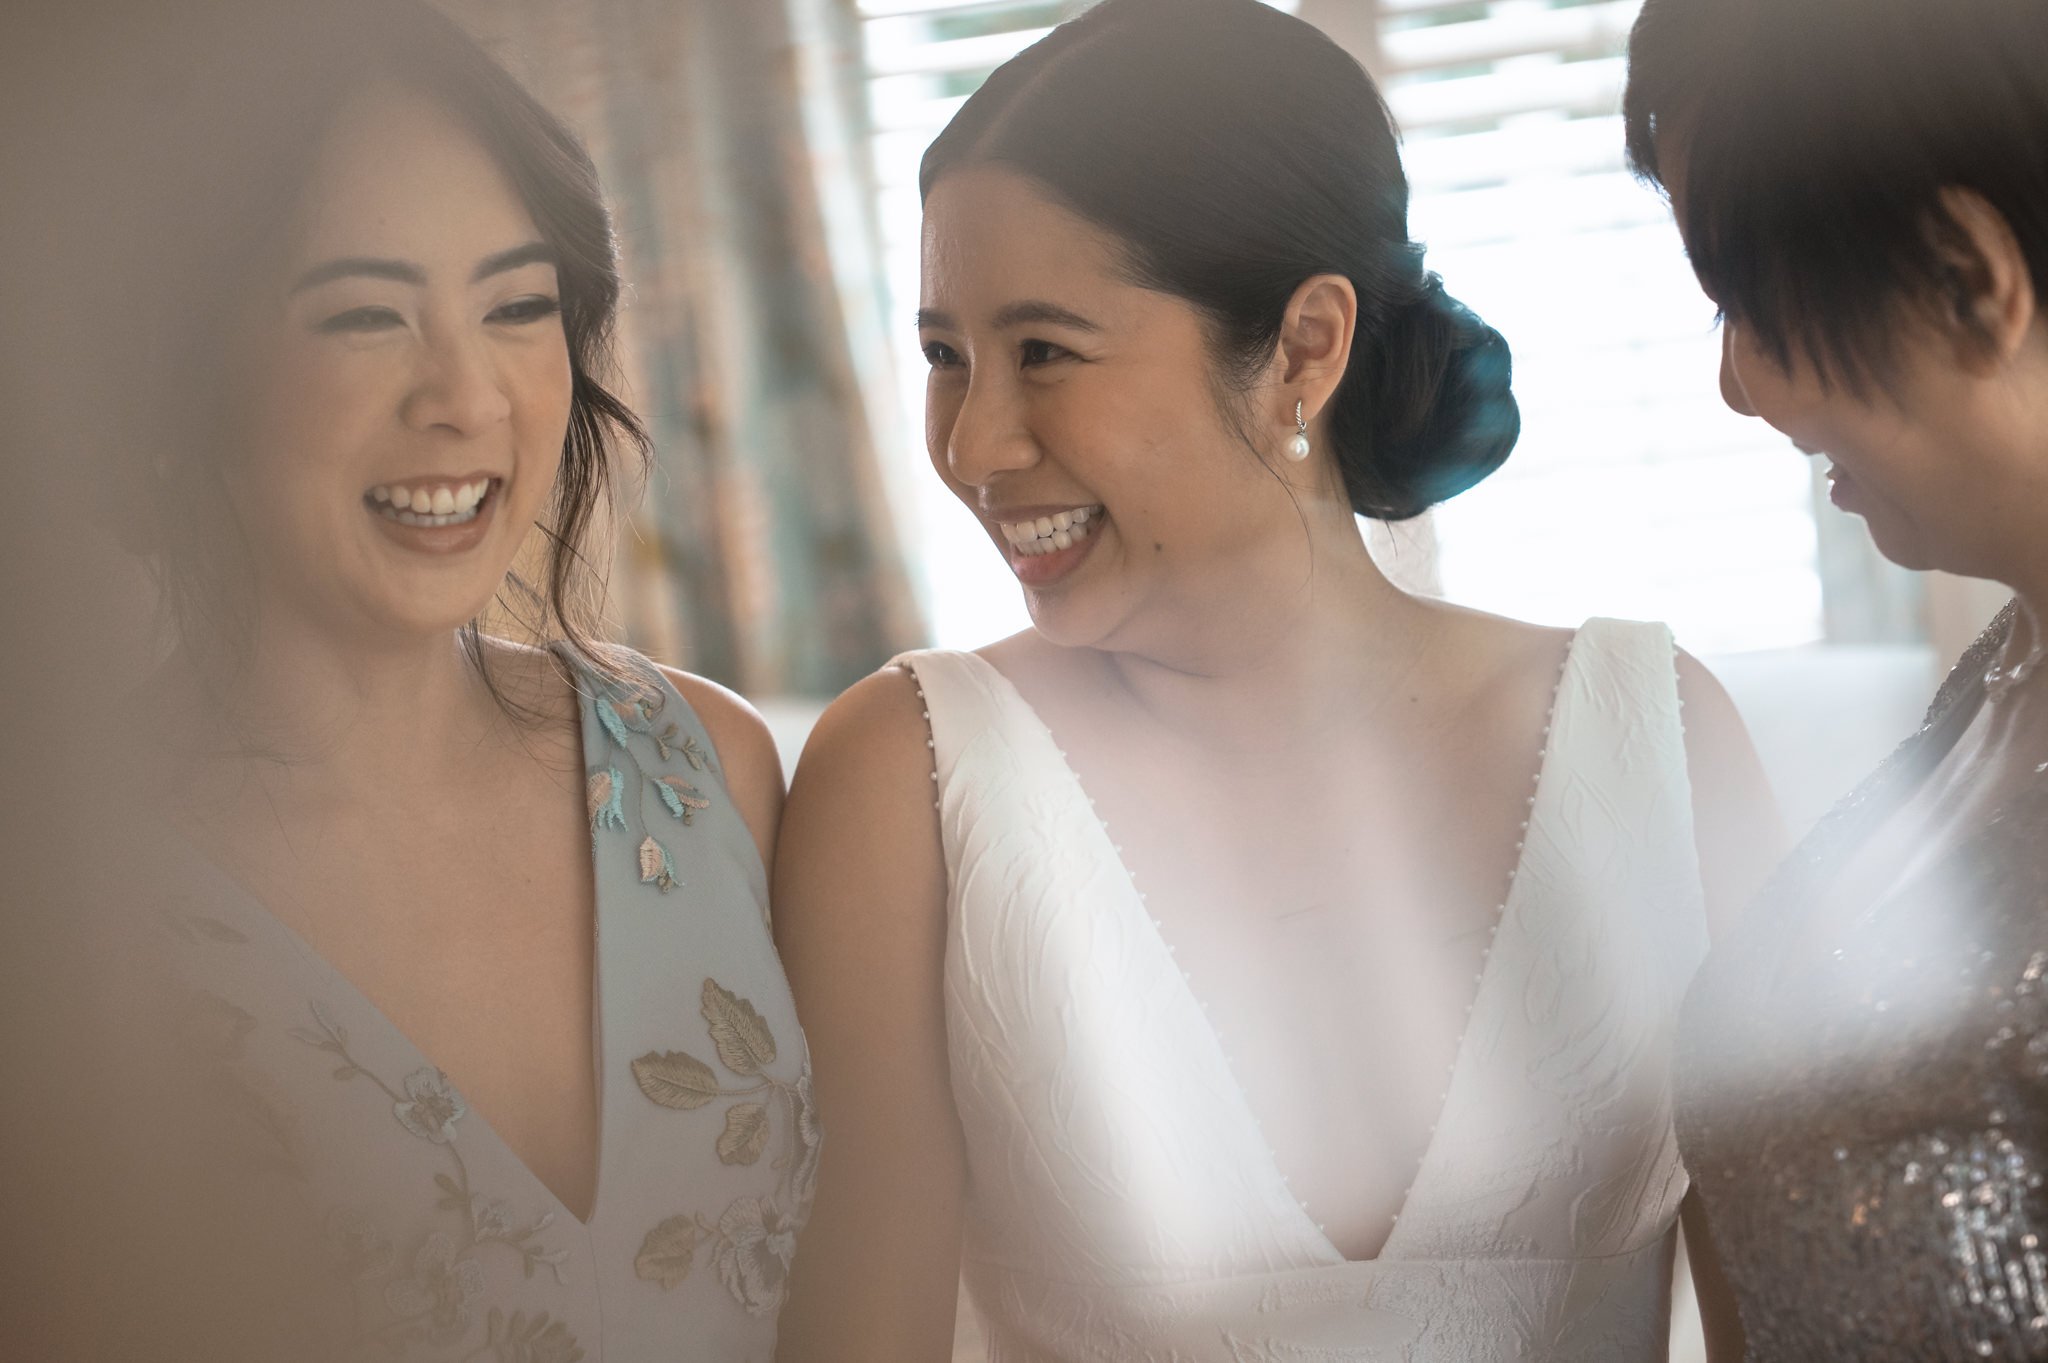 A bride and her bridesmaids are laughing in front of a mirror.